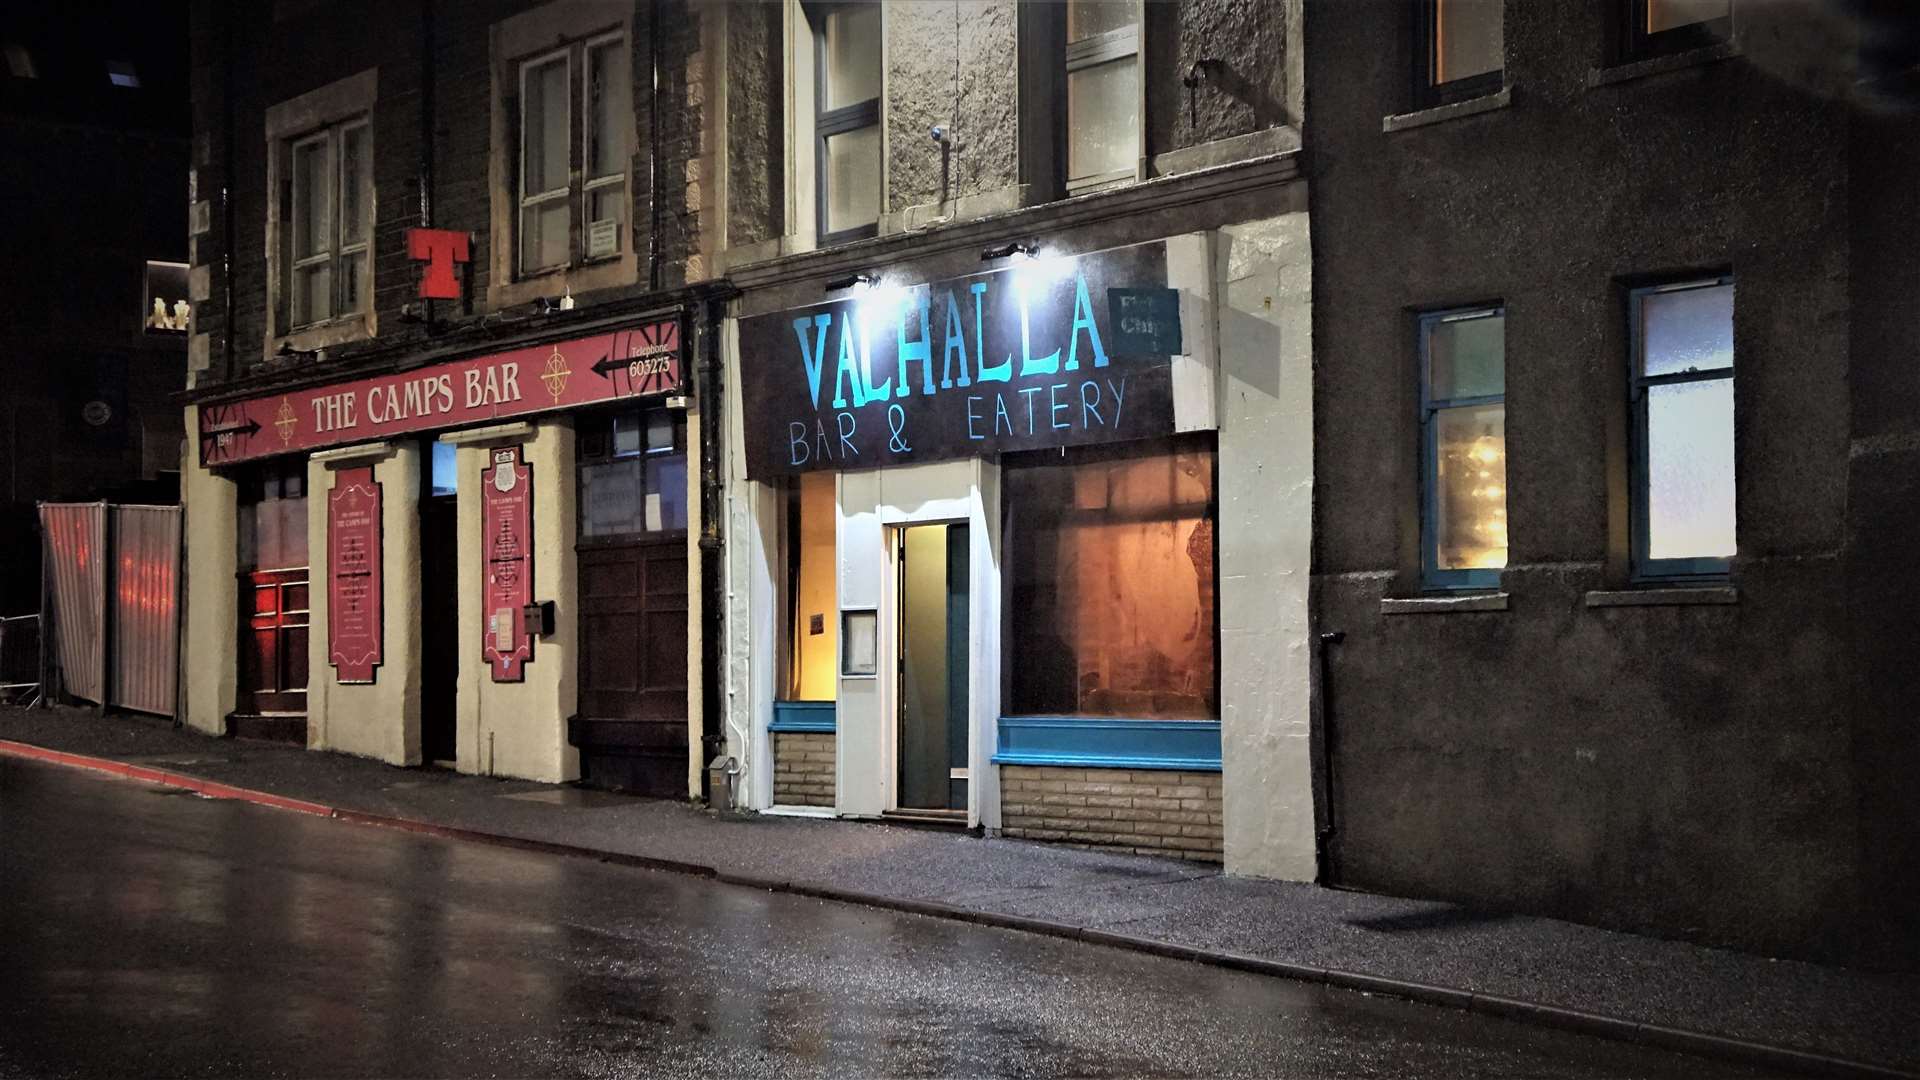 Valhalla Bar and Eatery in Wick. Picture: DGS